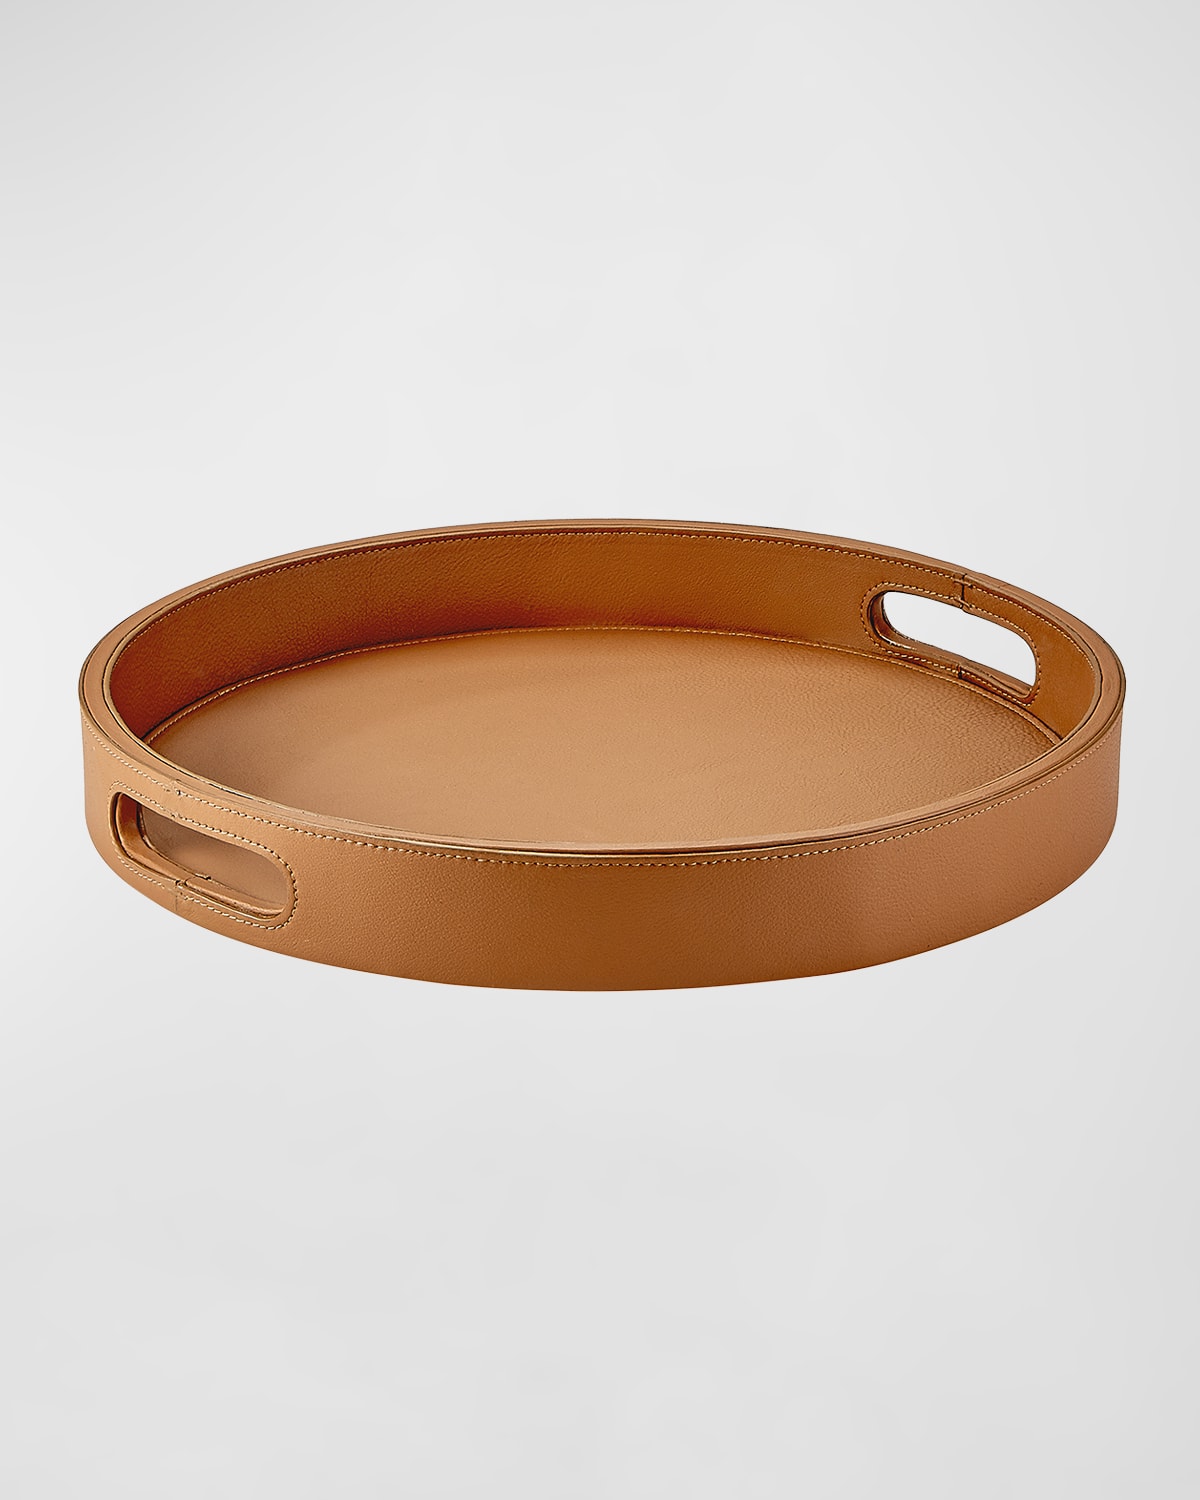 Graphic Image Leather Bar Tray In British Tan